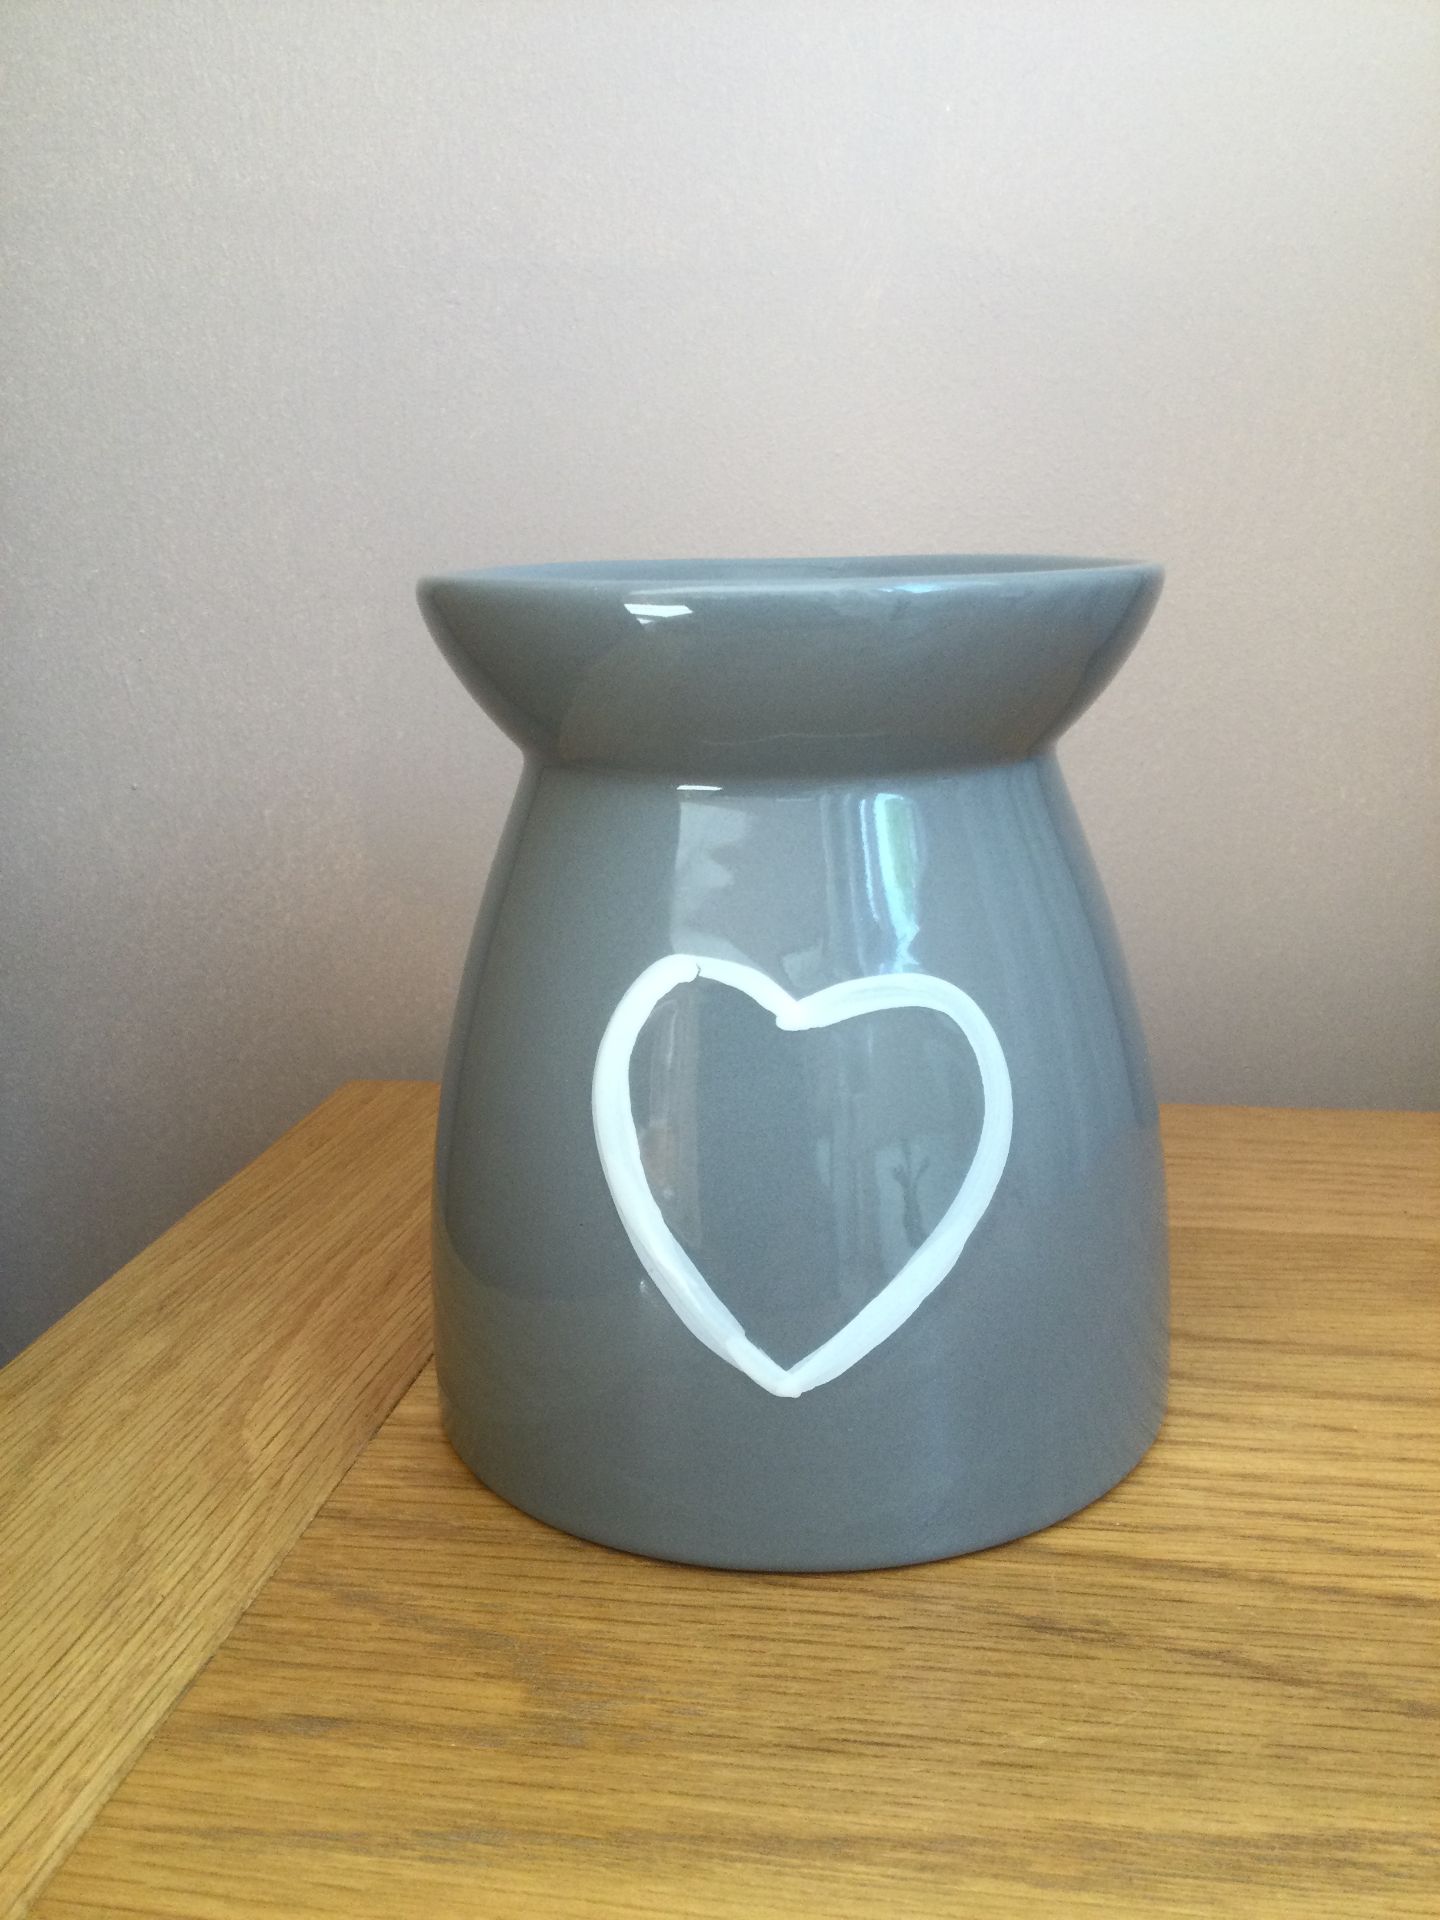 Piquaboo Large “White Heart” Ceramic Oil Burner Height 13cm, New With Gift Box - Image 2 of 4